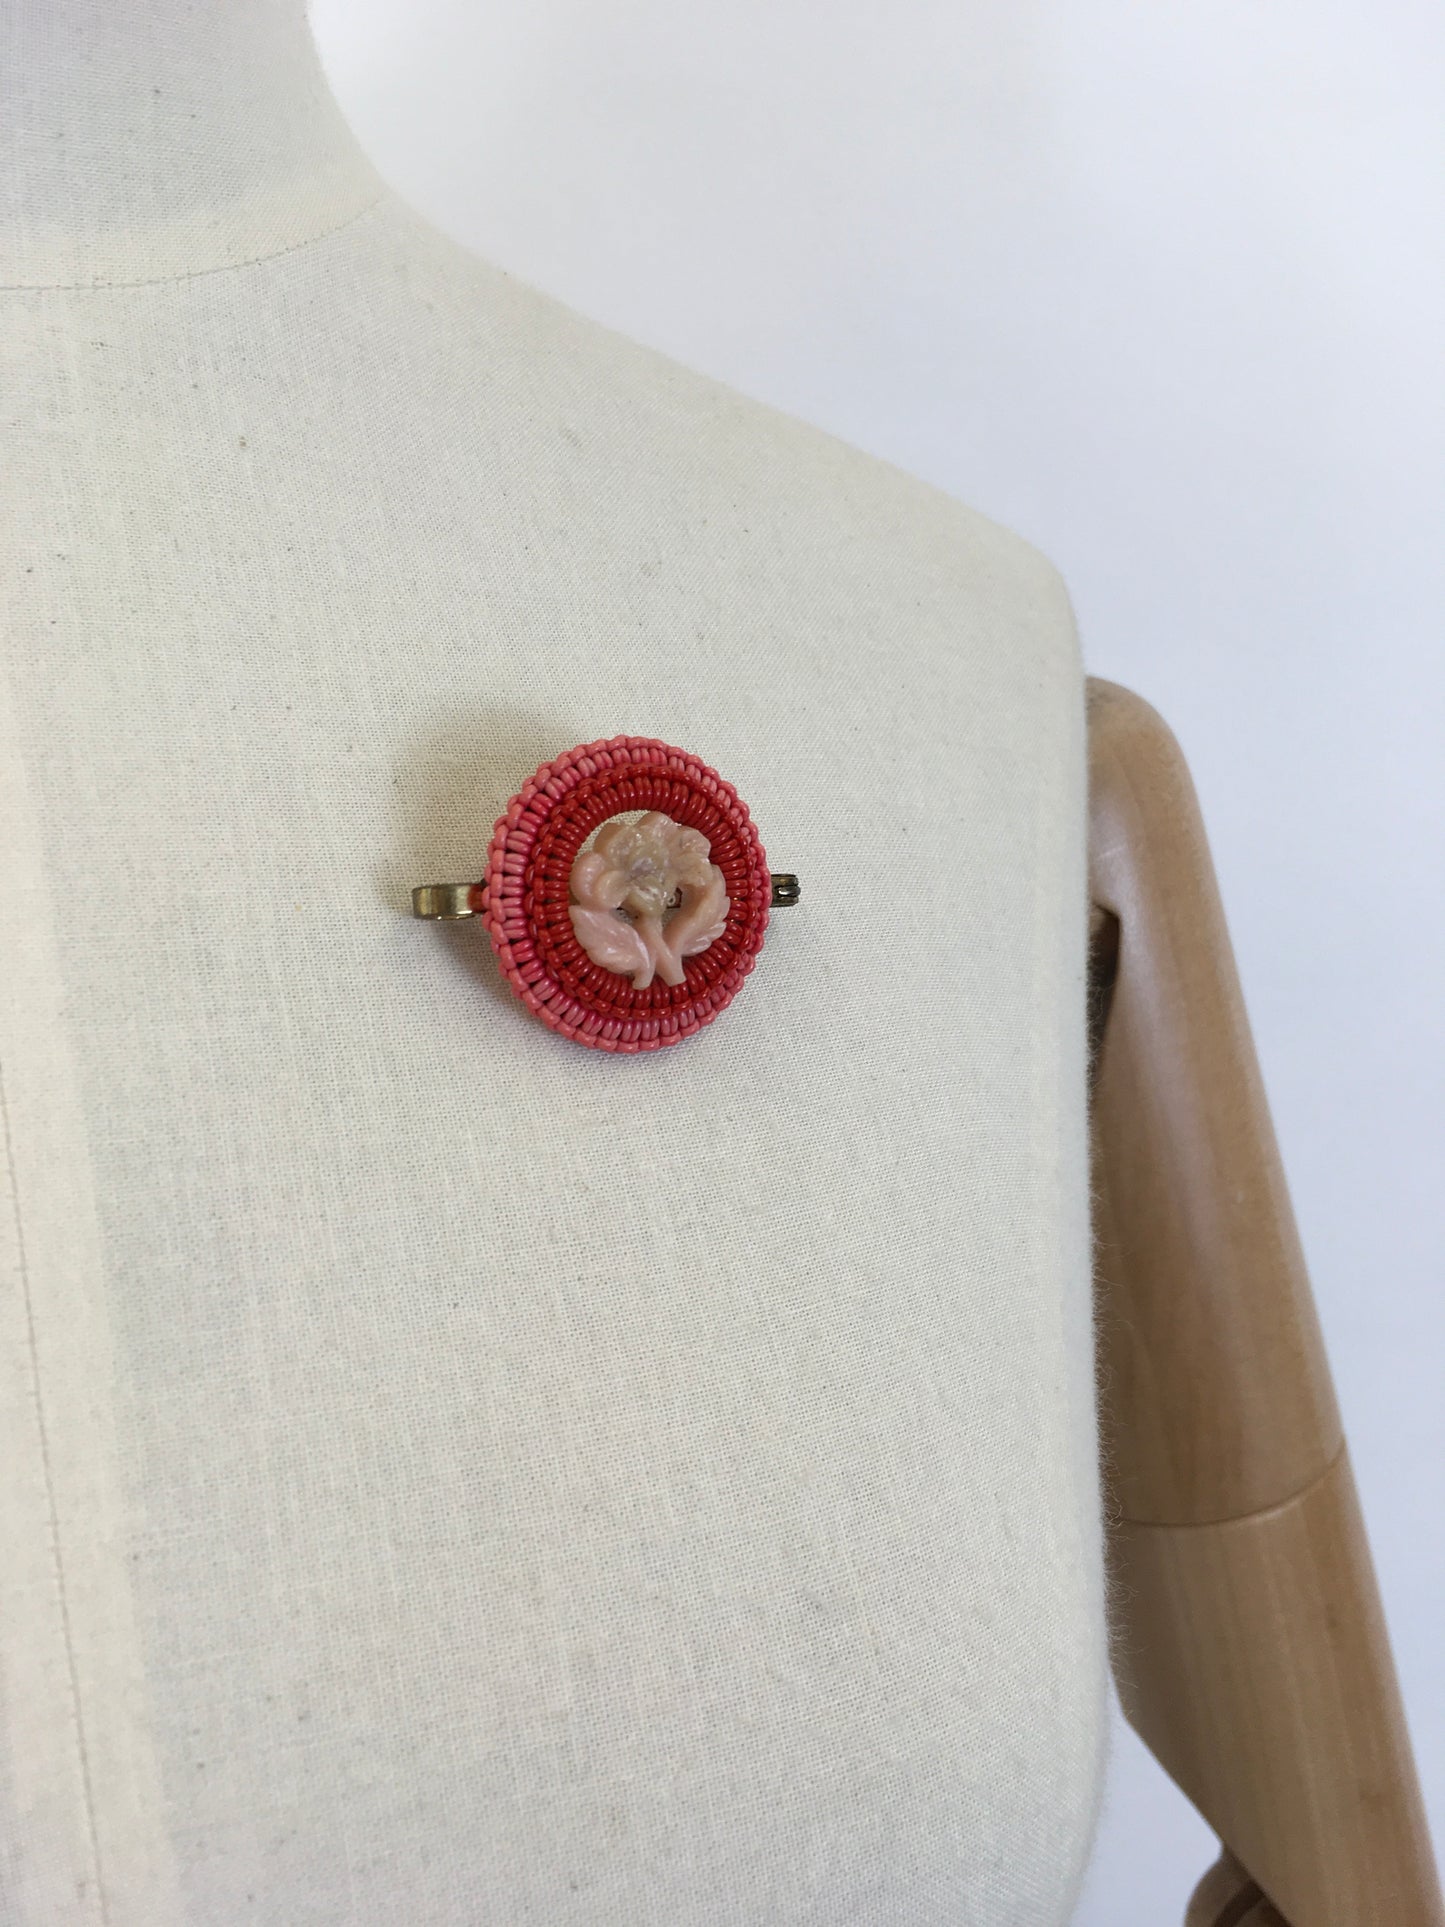 Original 1940’s Make Do And Mend Telephone Cord Brooch - In Powdered Pink and Lipstick Coral